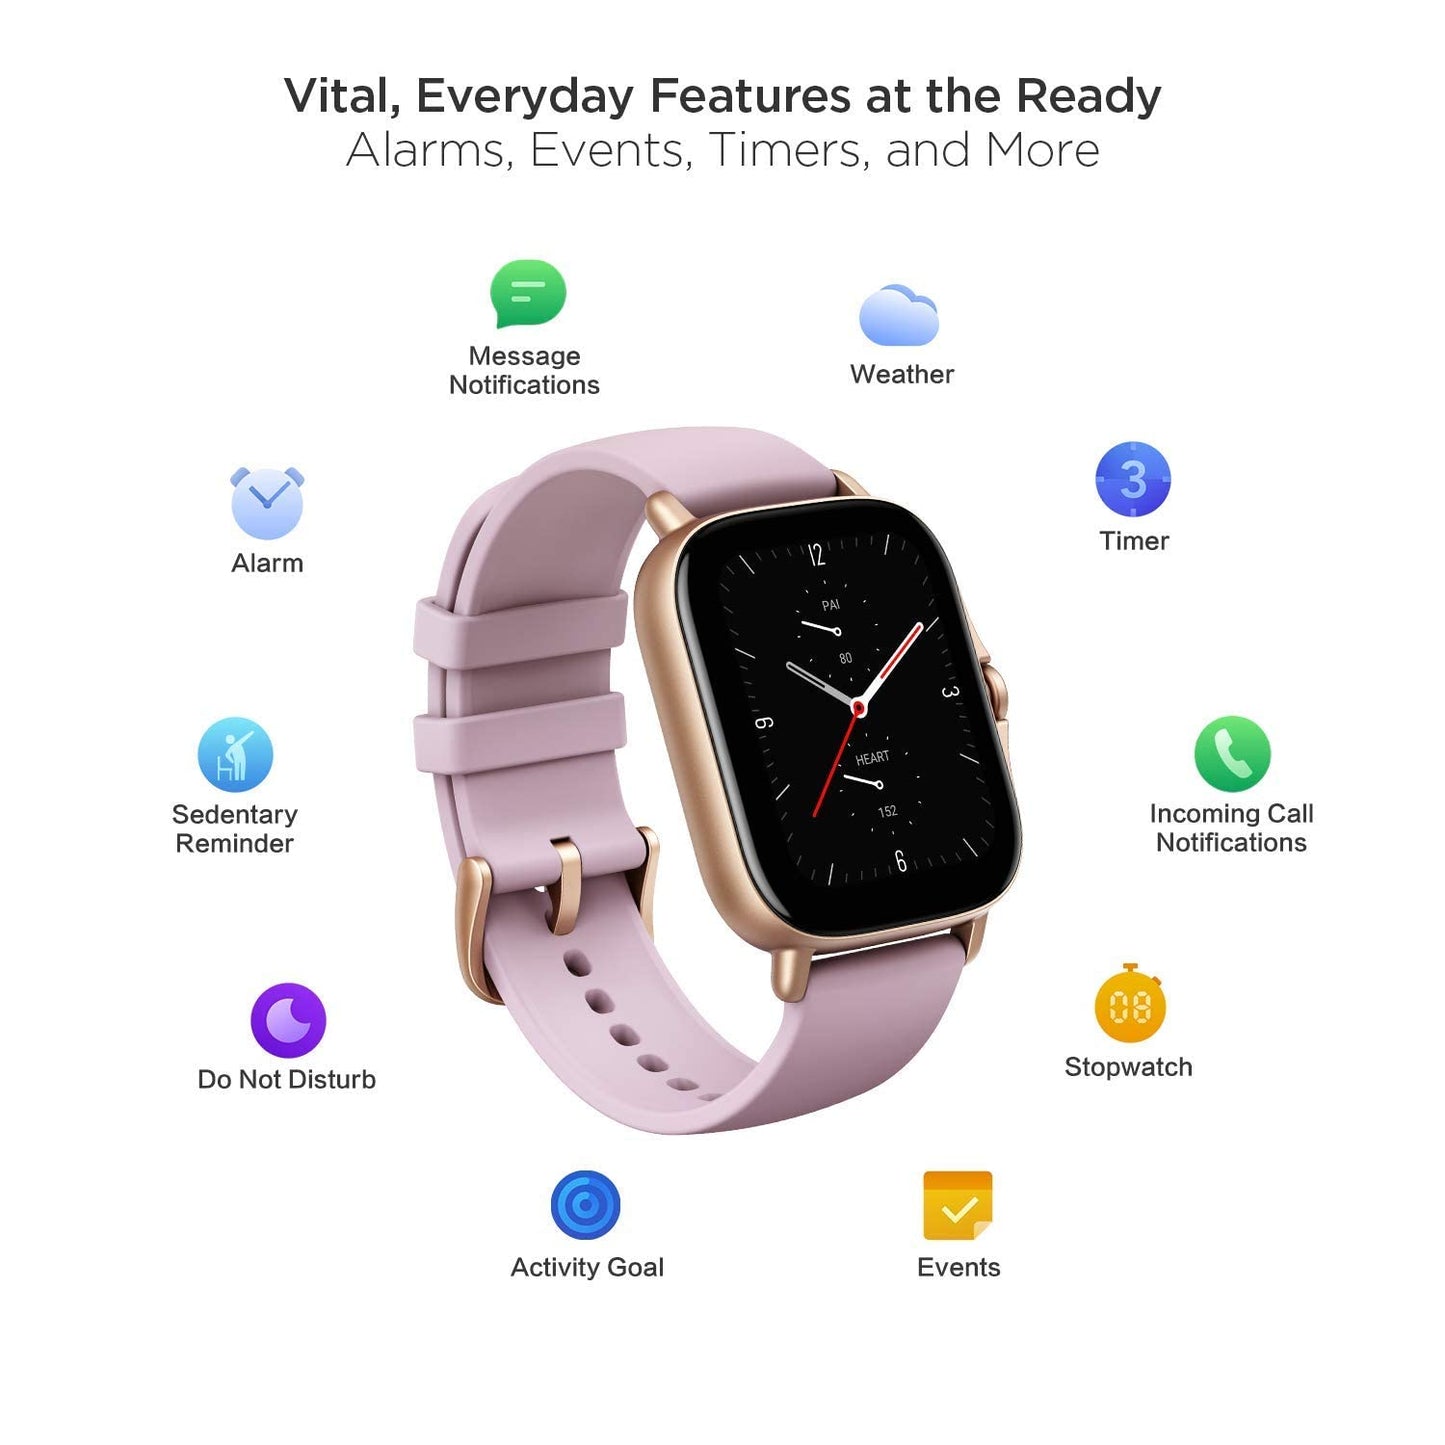 (Refurbished) Amazfit GTS 2e Smartwatch, SpO2 & Stress Monitor, 1.65 Always-on AMOLED Display, Built-in GPS, Built-in Alexa,14-Day Battery Life, 90+ Sports Models, 50+ Watch Faces Lilac Purple, Regular